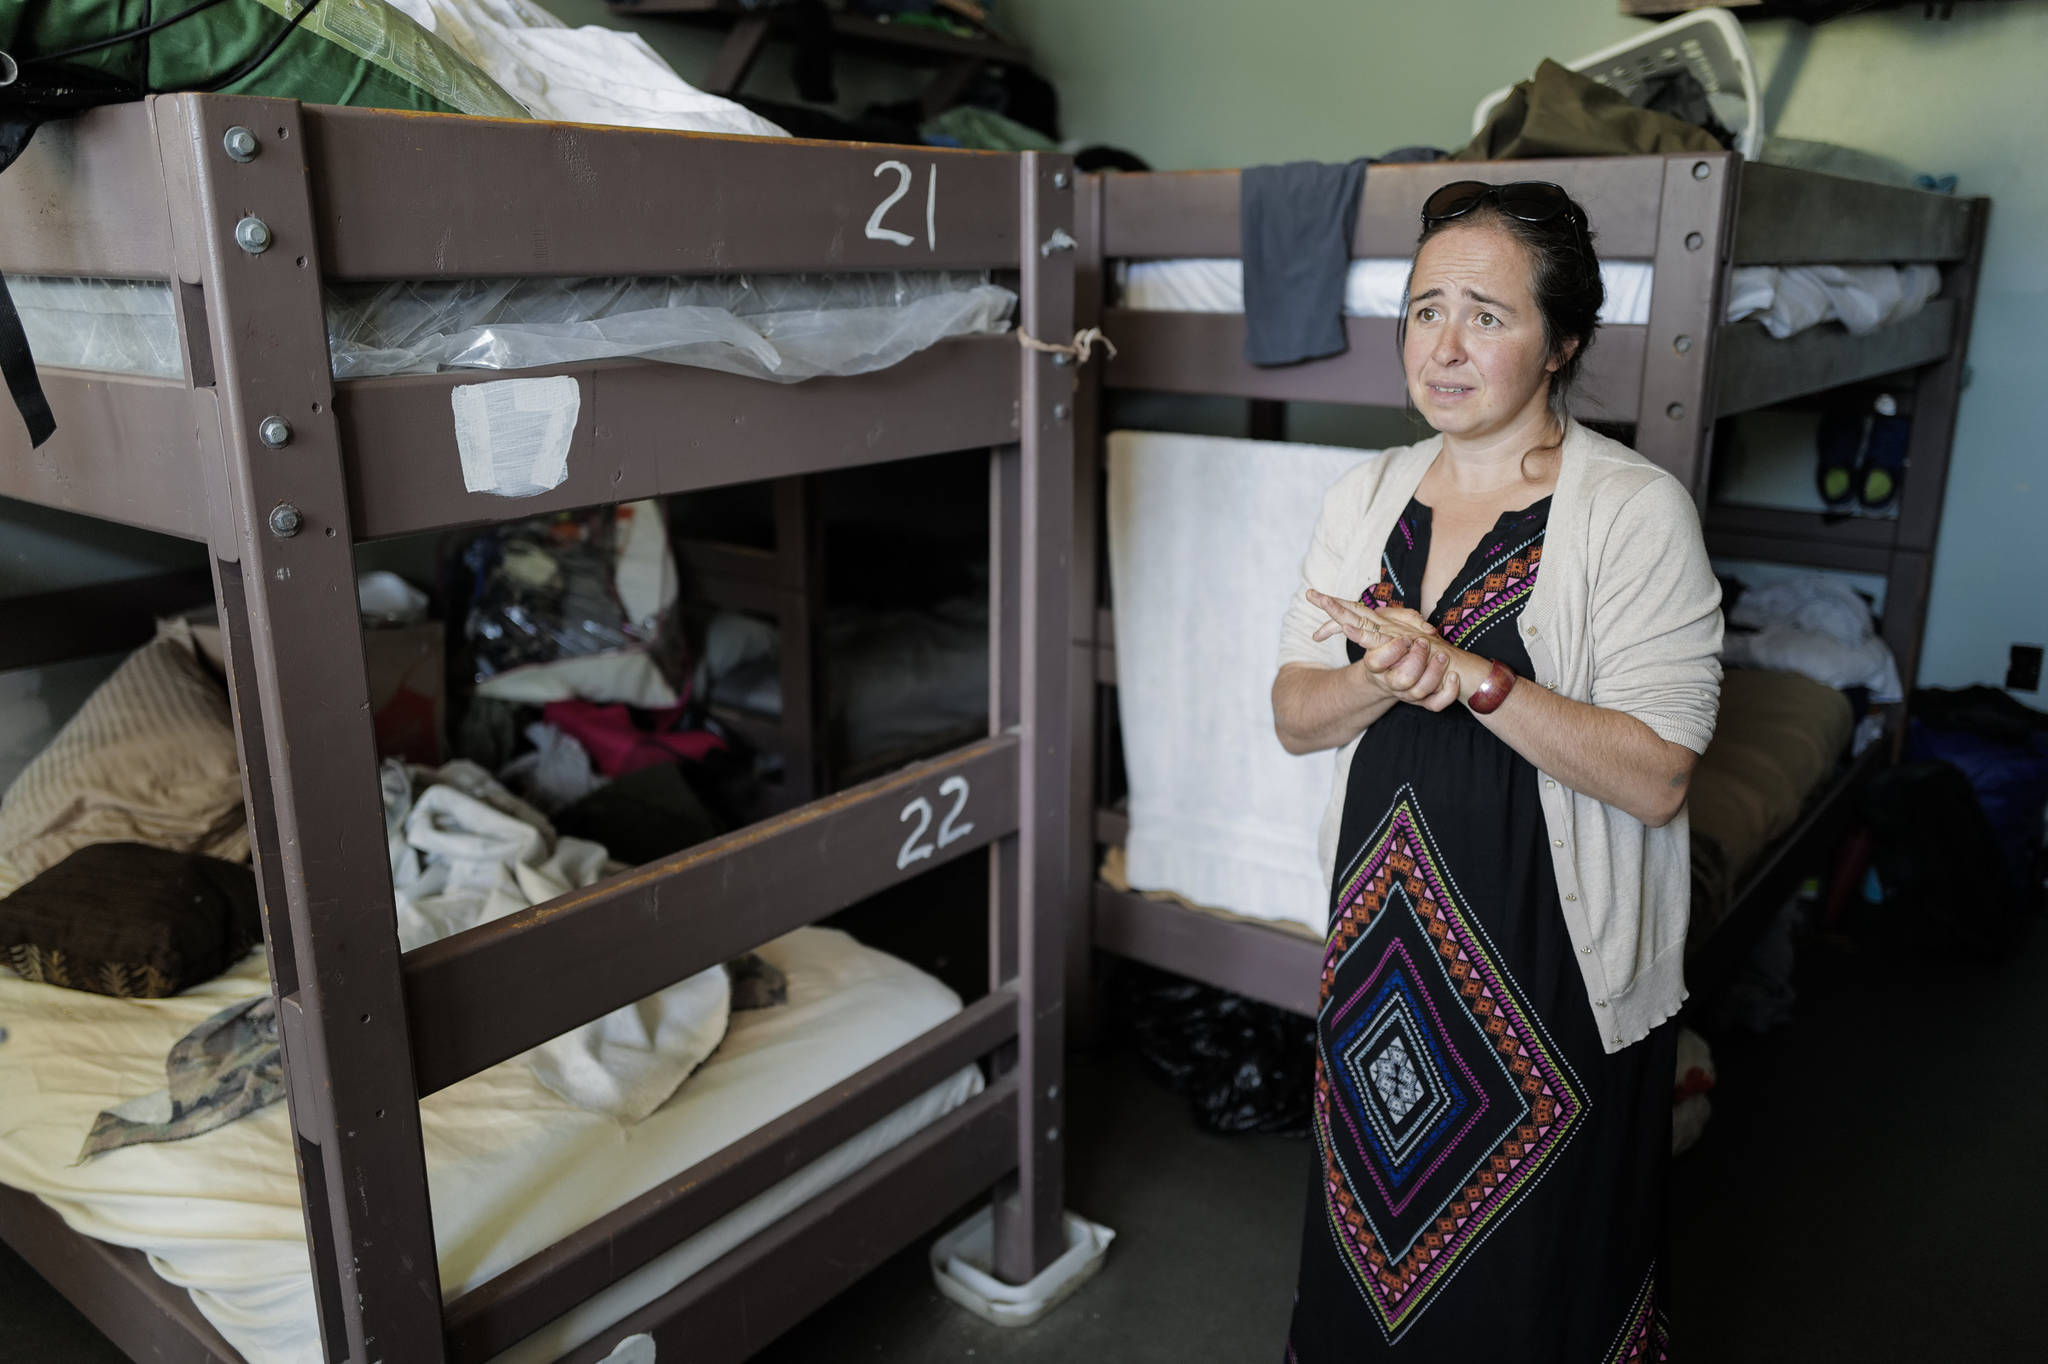 Mariya Lovishchuk, Executive Director of the Glory Hall — Juneau’s homeless shelter and soup kitchen, stands in one of the two men’s dormitories as she talks about the crowded conditions at their current location on South Franklin Street on Tuesday, Aug. 6, 2019. Fundraising is currently underway to buy property in the airport area for a new facility. (Michael Penn | Juneau Empire)